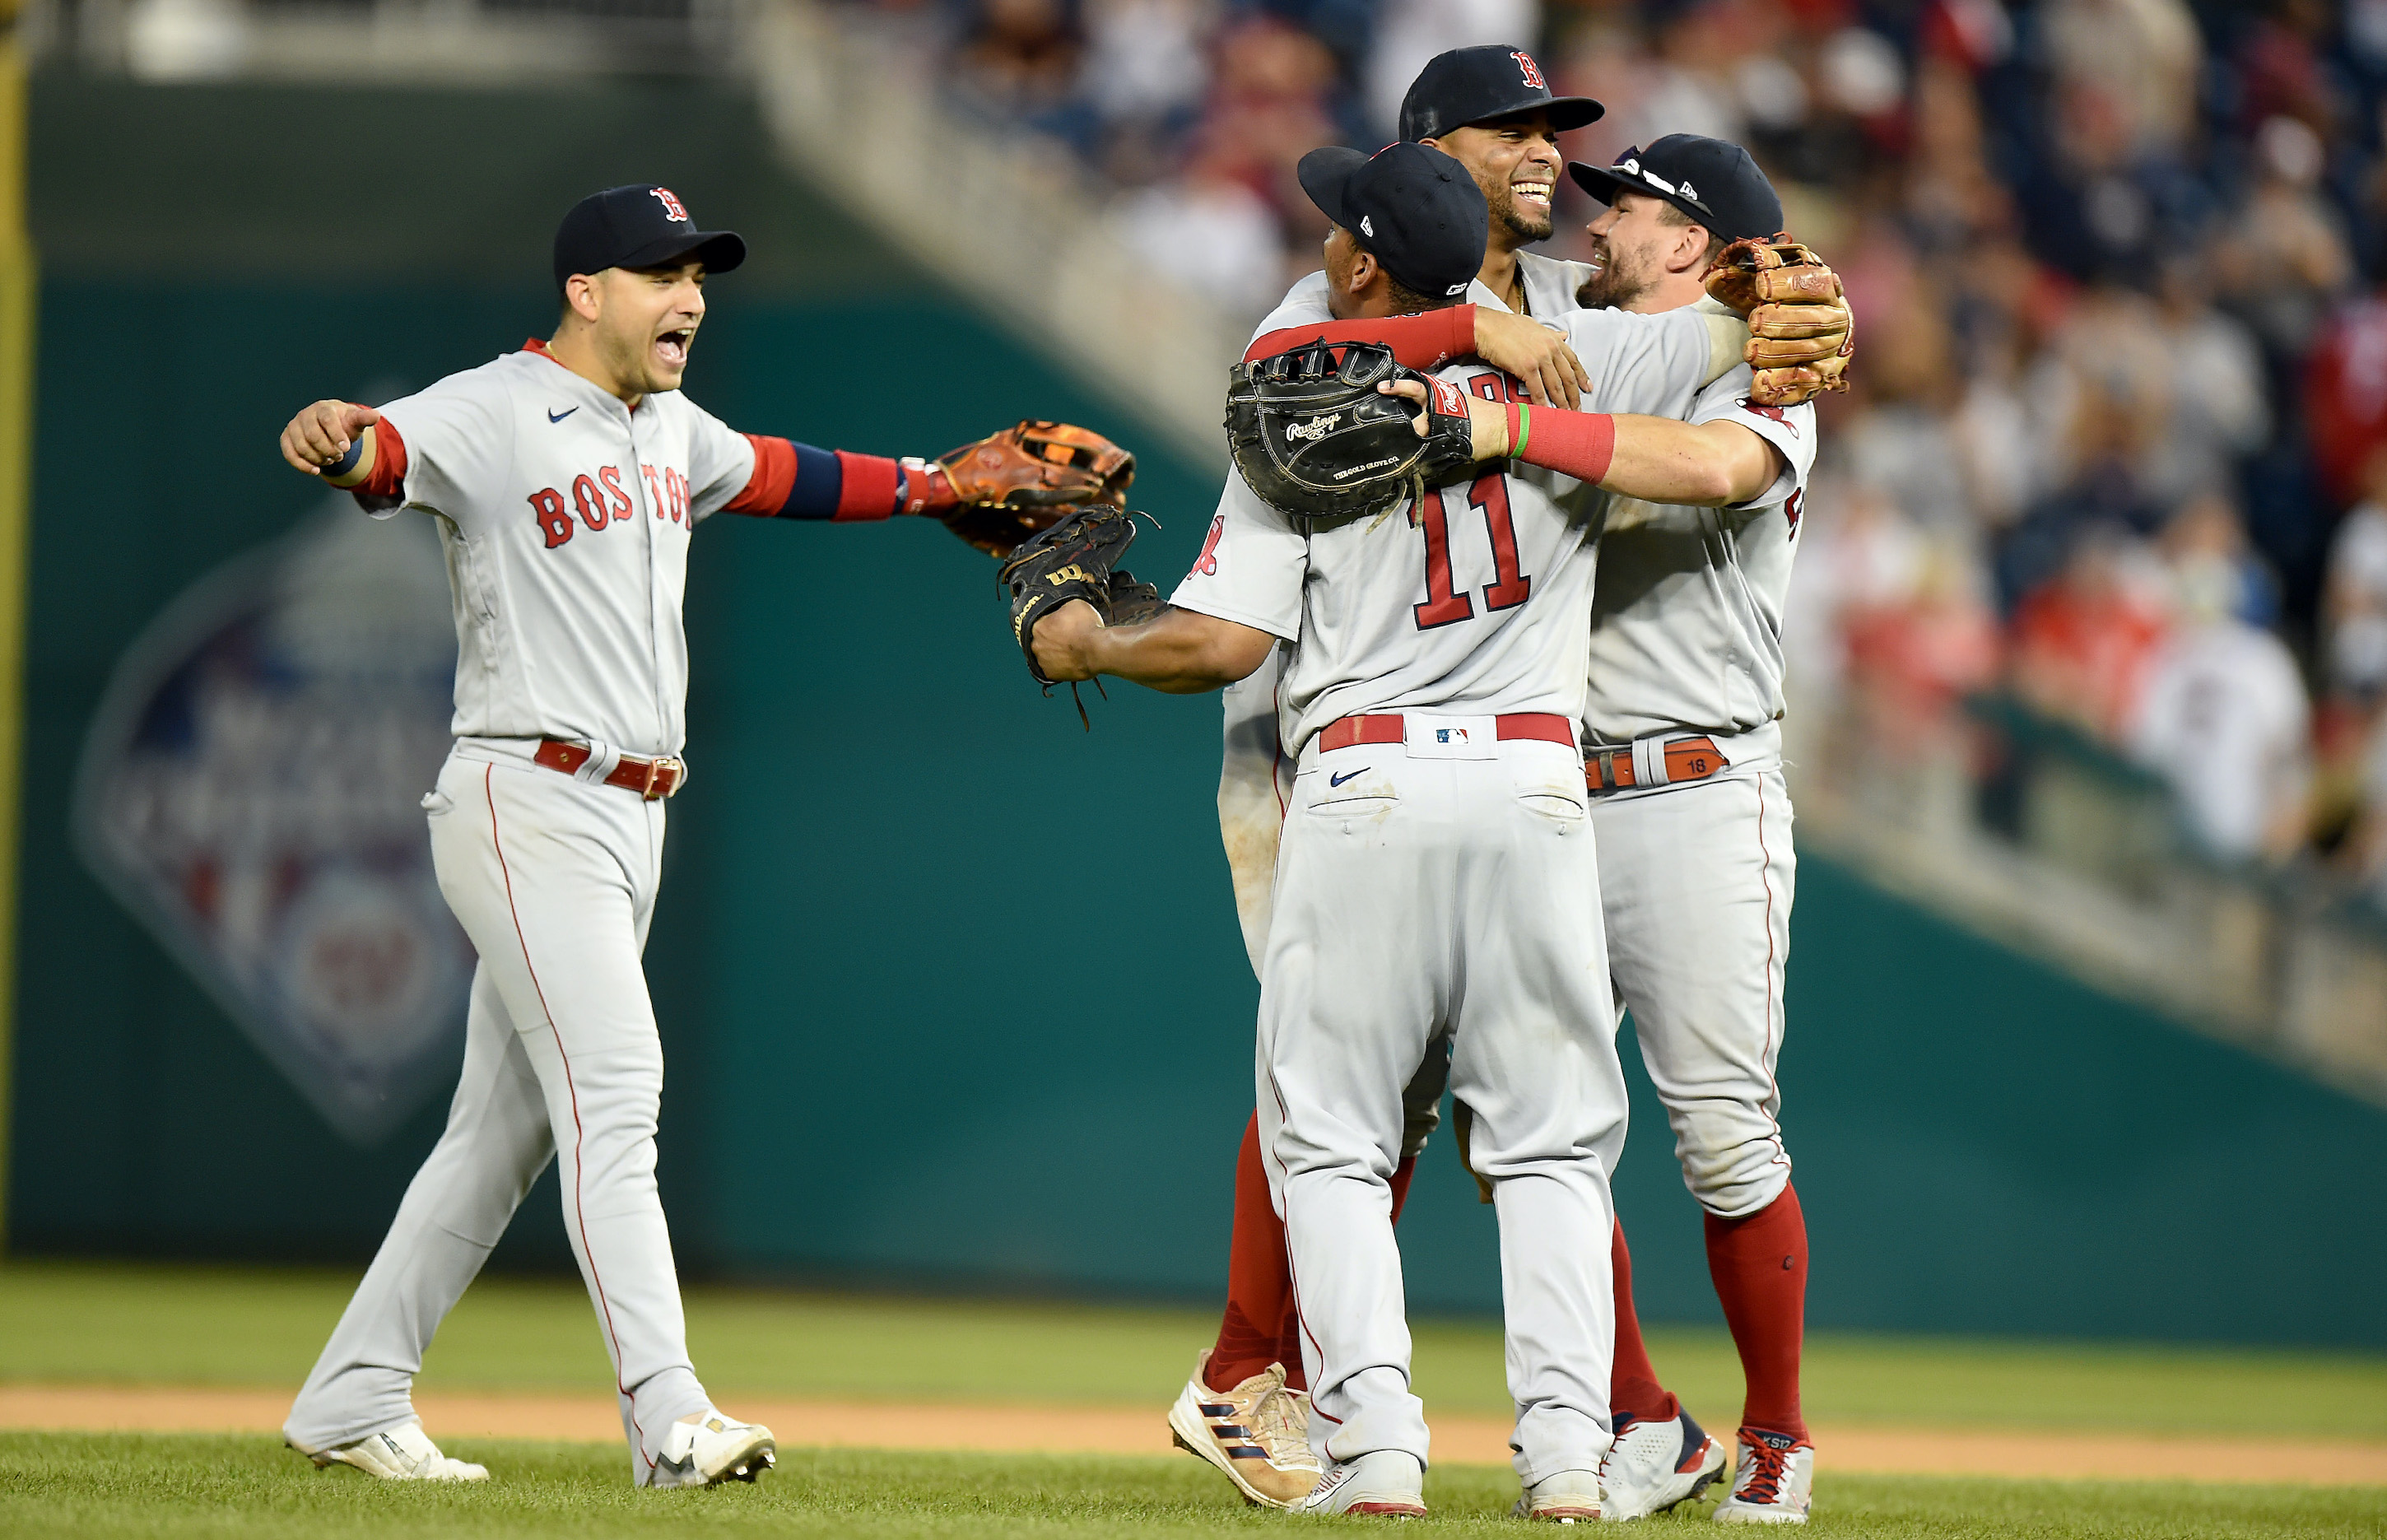 Jose Iglesias #12, Xander Bogaerts #2, Rafael Devers #11 and Kyle Schwarber #18 of the Boston Red Sox celebrate after a 7-5 victory against the Washington Nationals at Nationals Park on October 03, 2021 in Washington, DC.